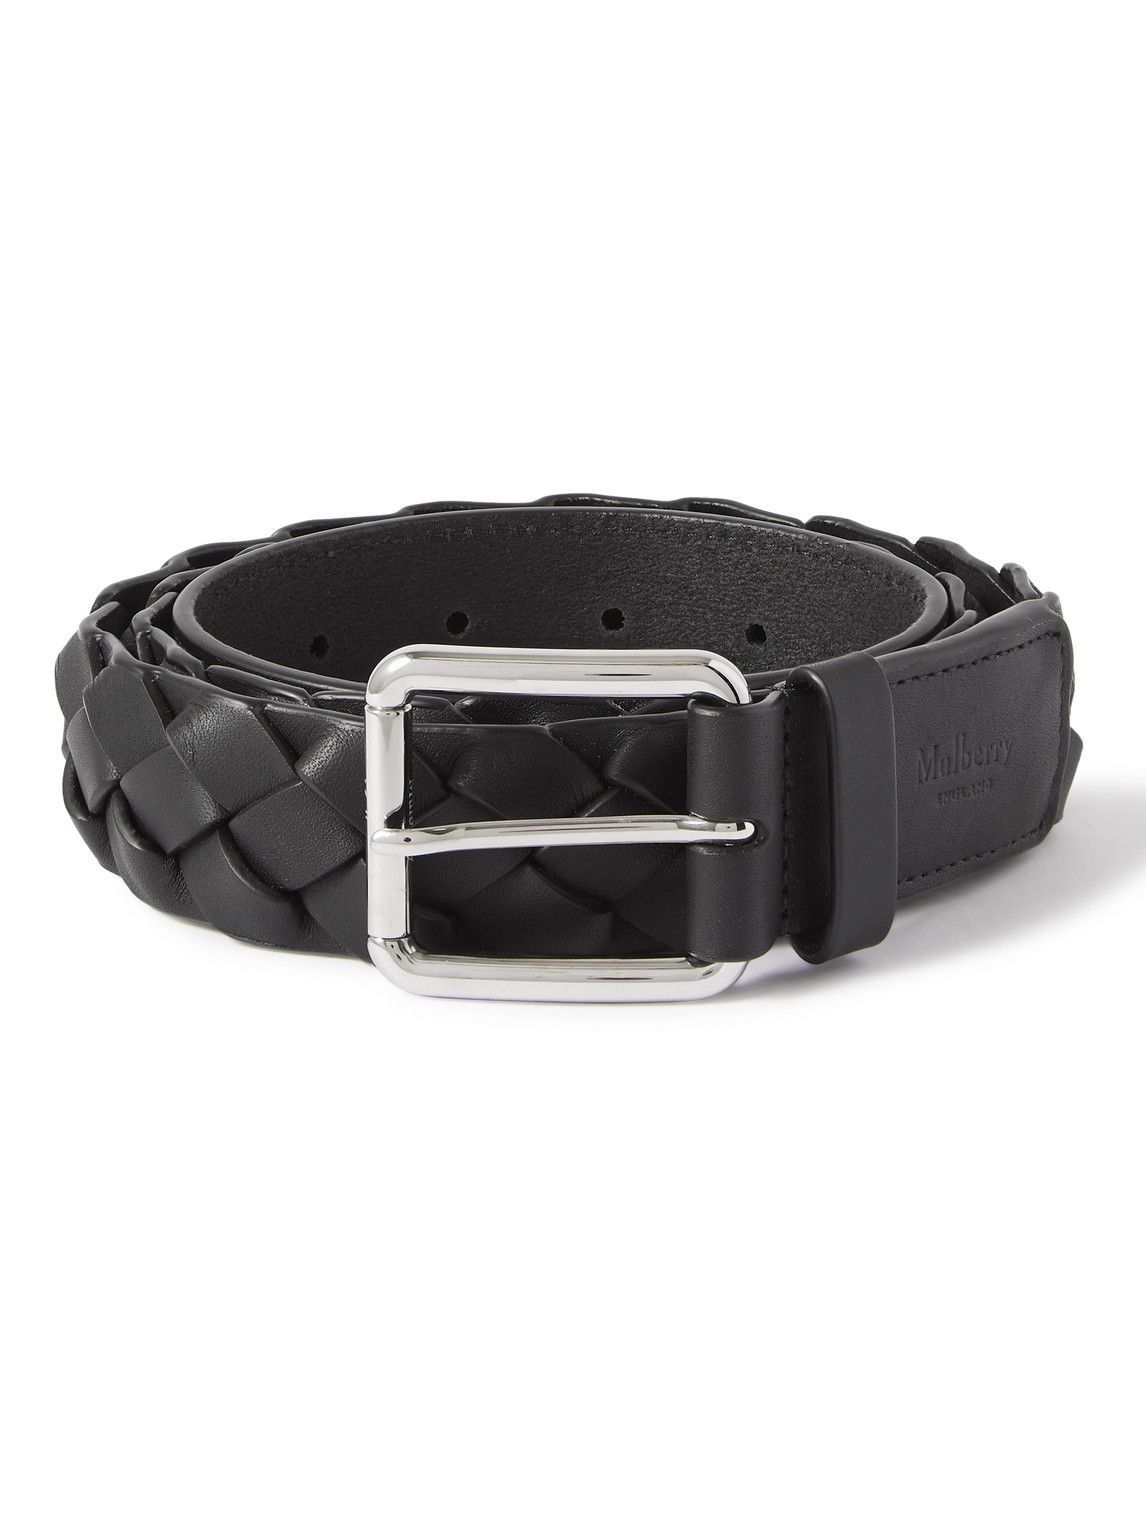 Mulberry - 4cm Braided Leather Belt - Black Mulberry